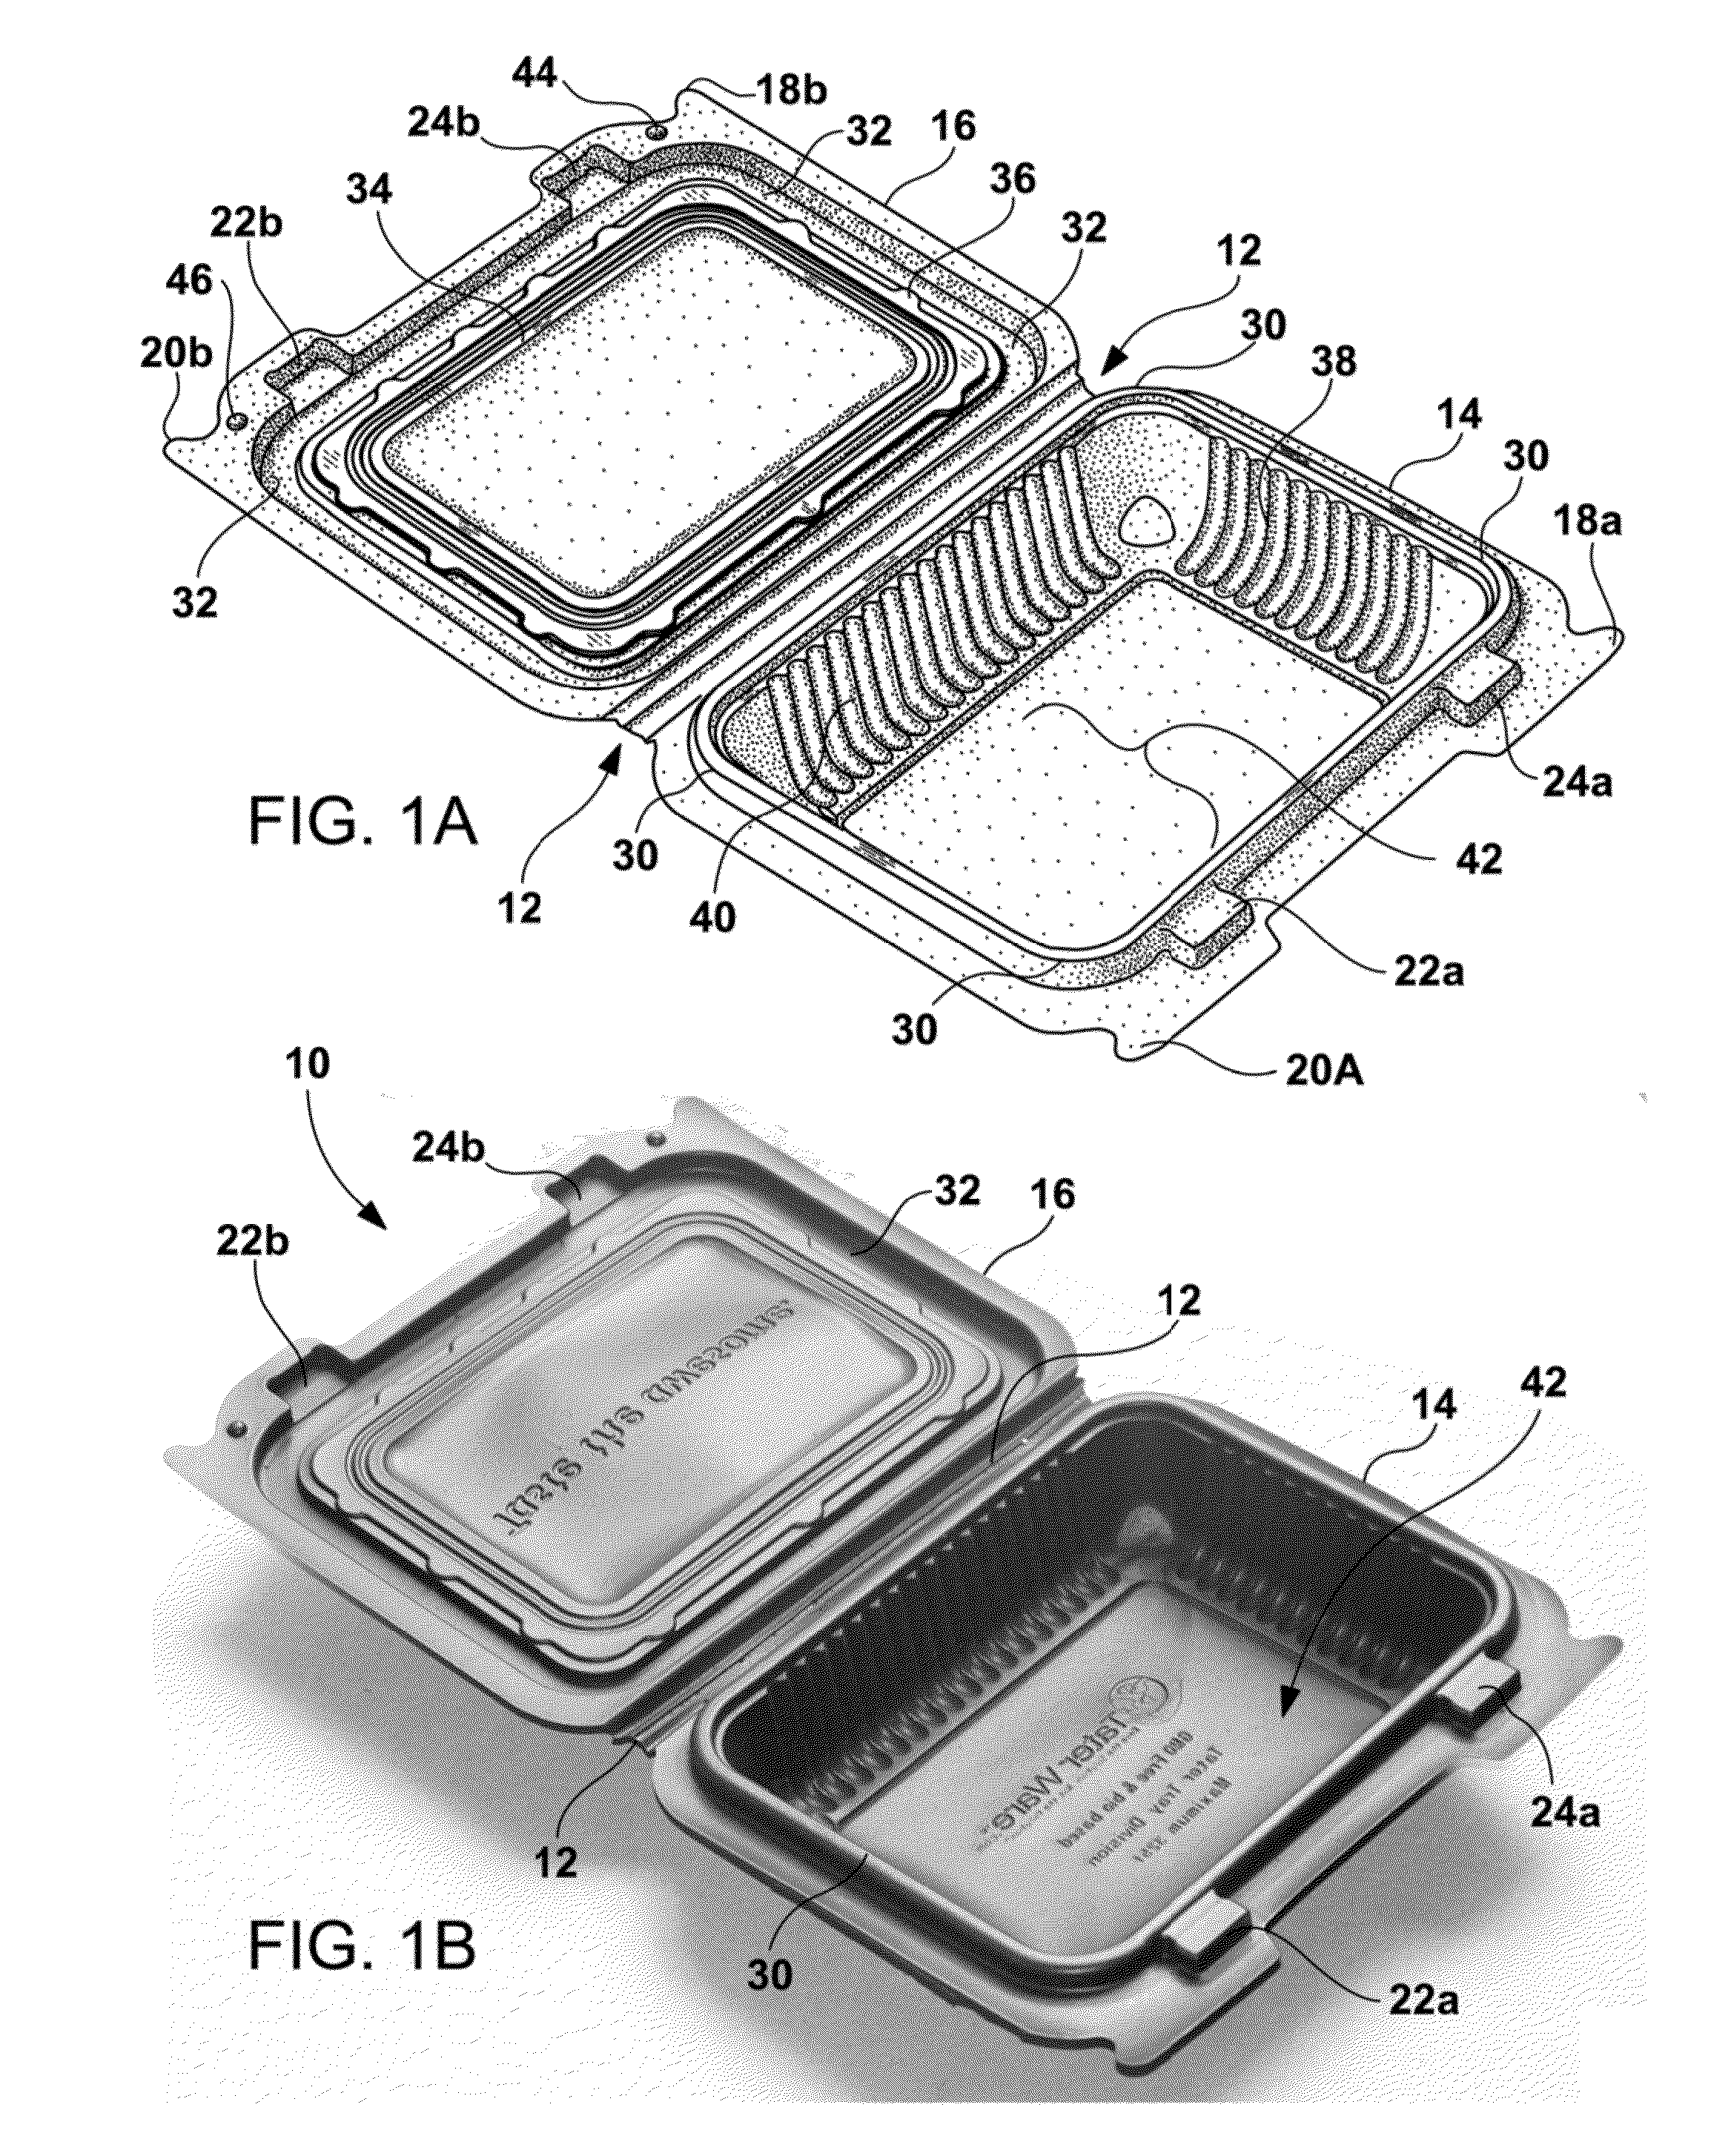 One-Piece Food Container having an Integral Hinge with Latching Mechanisms and a Full Perimeter Seal